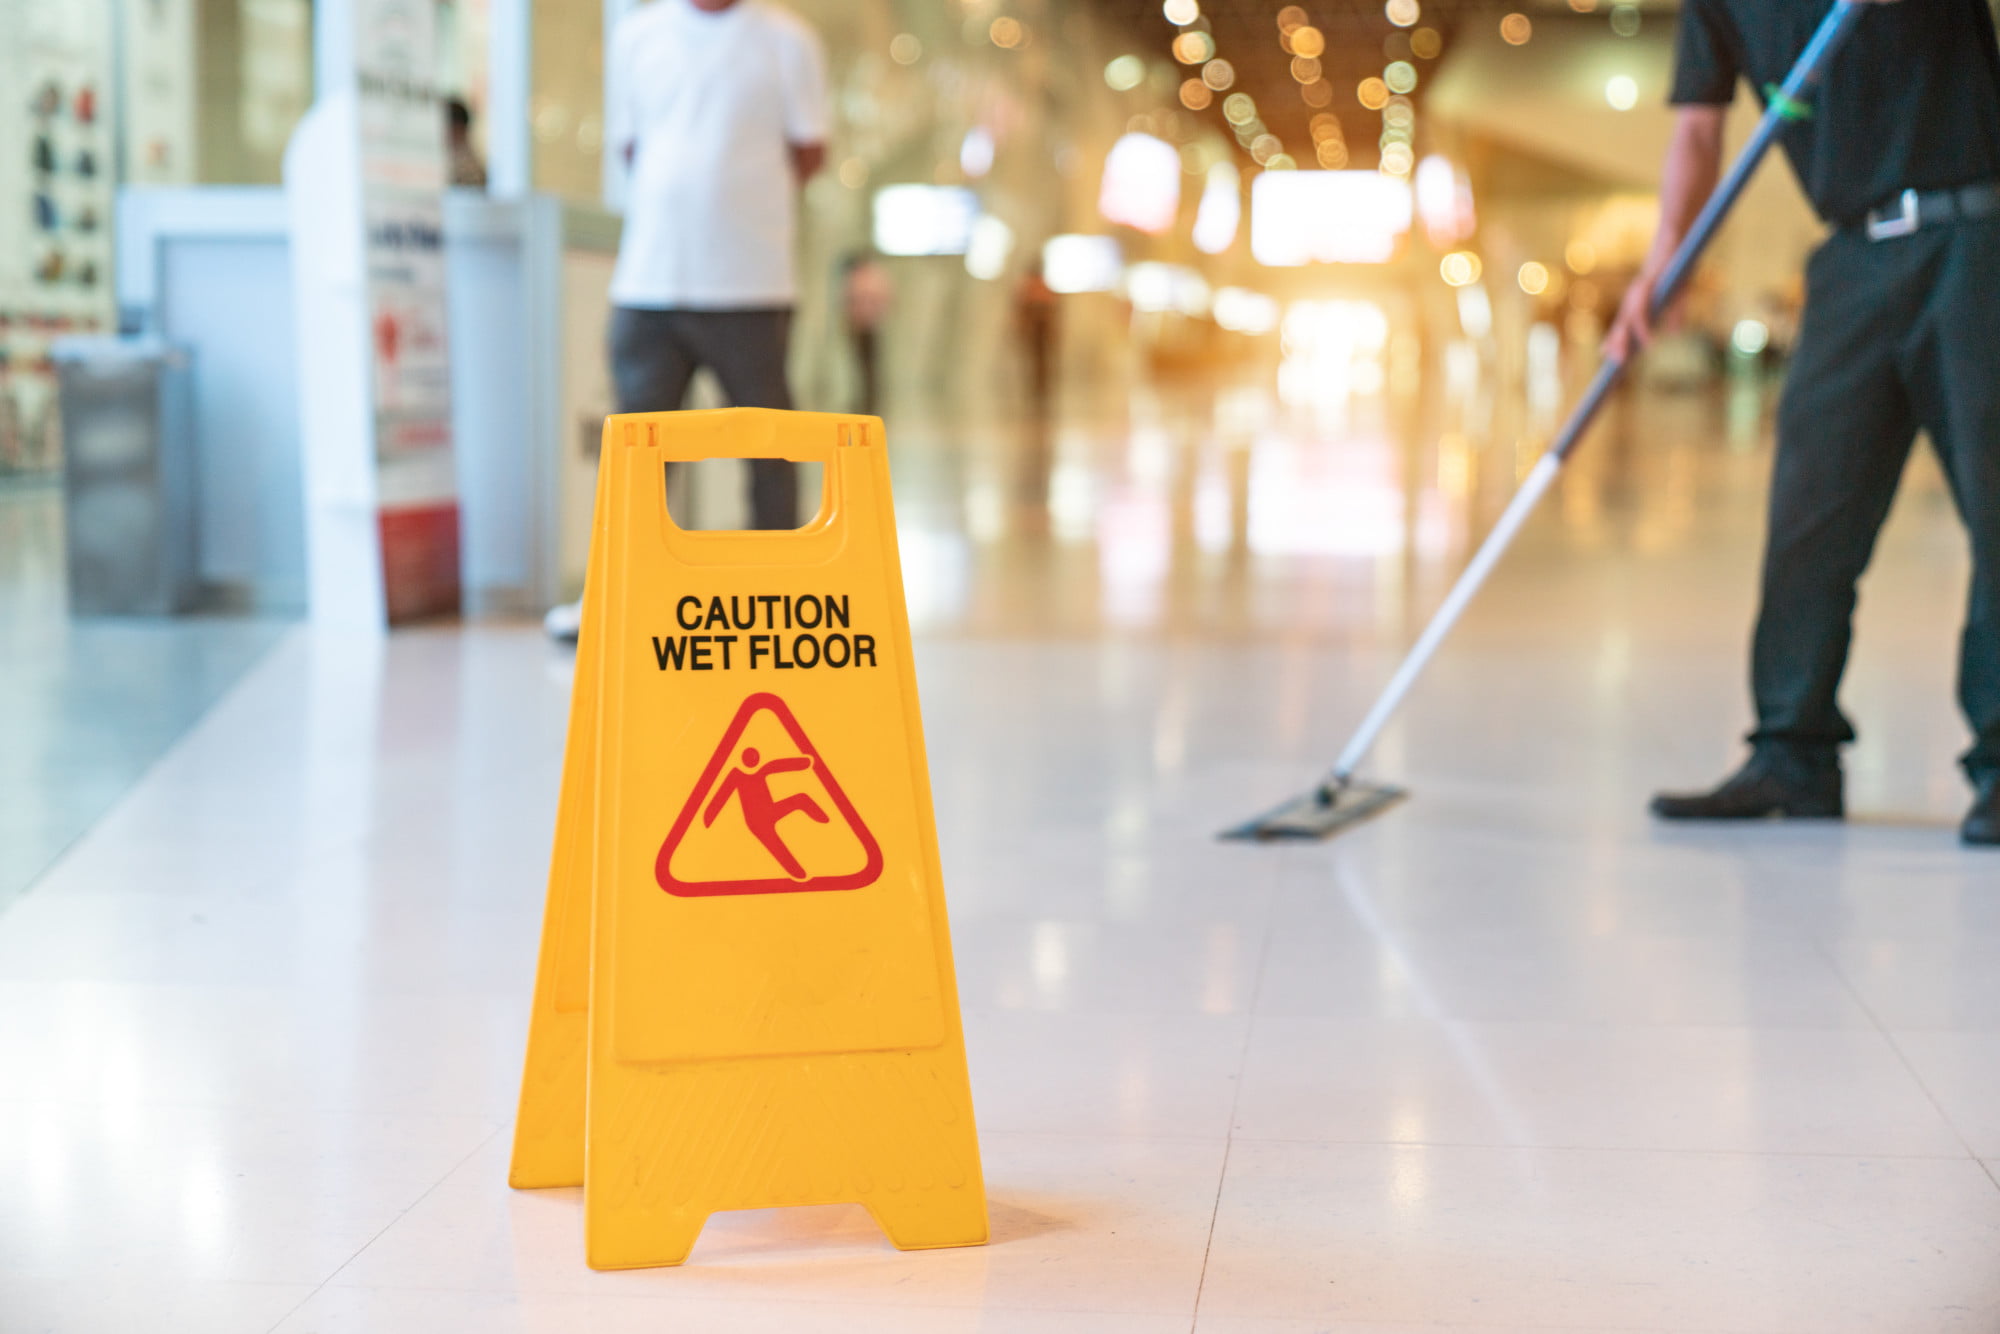 Do you need help with finding janitorial services in Utah? Learn about selecting a reputable service with a proven track record.